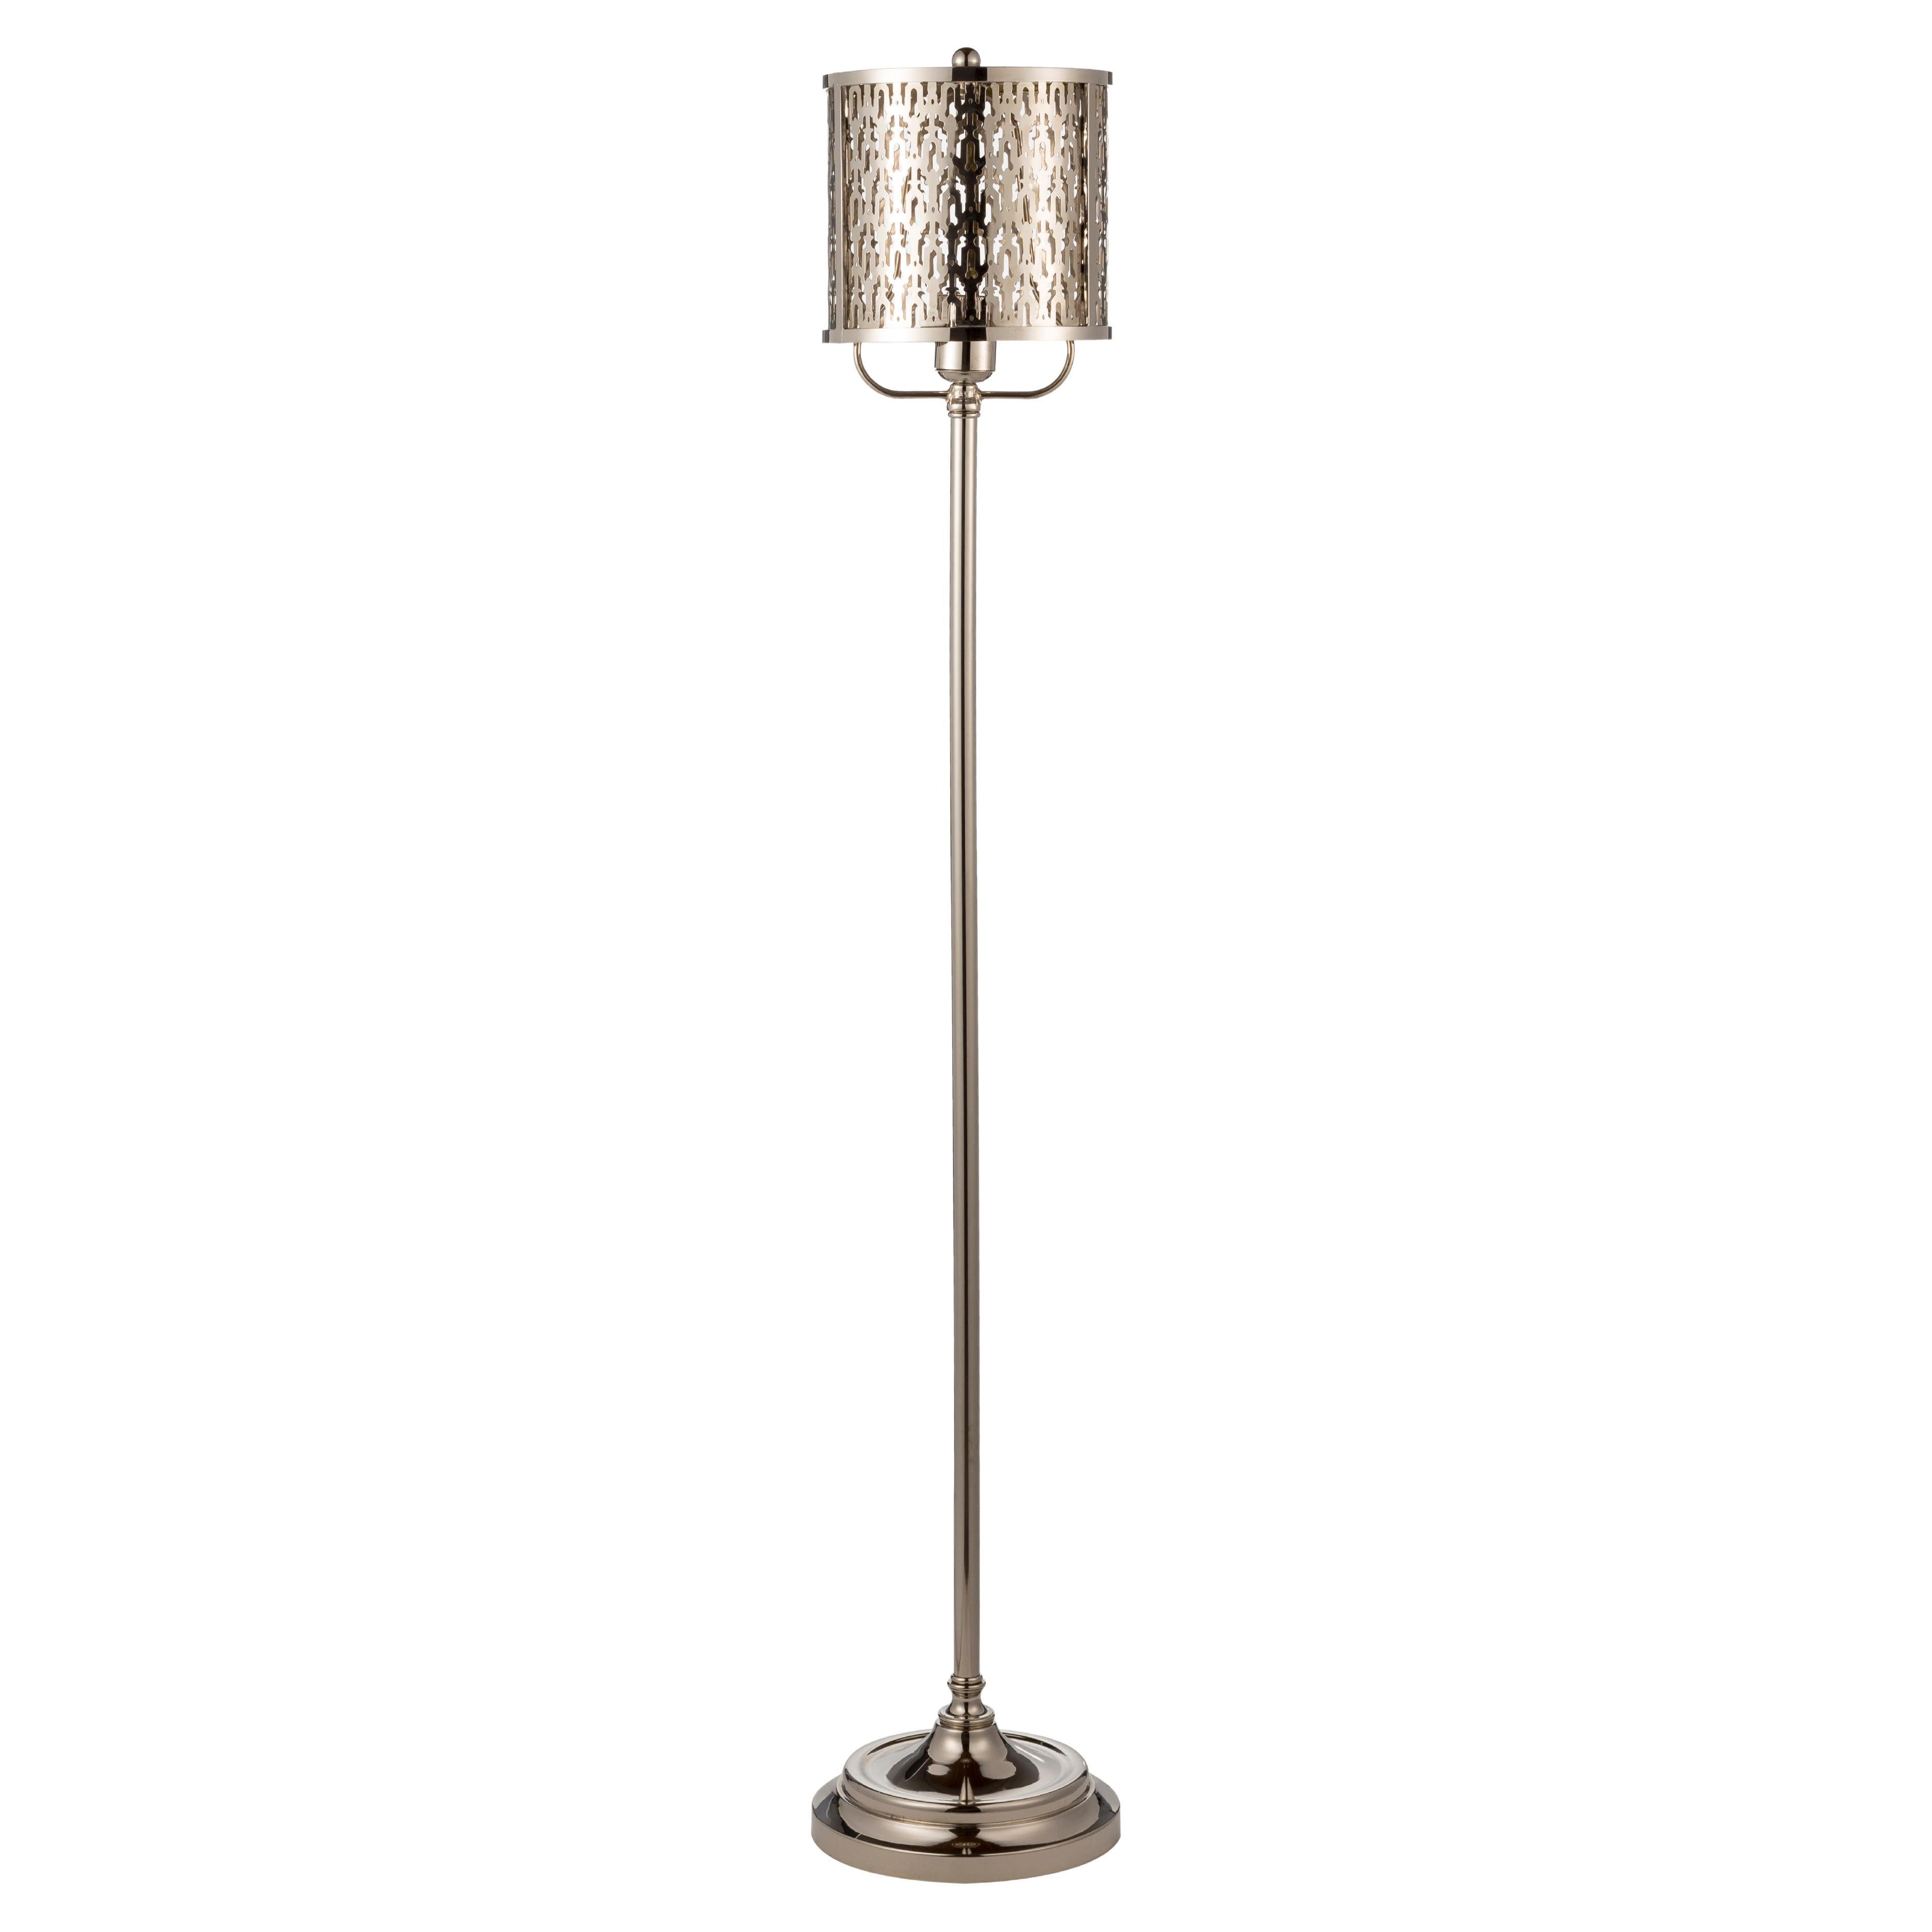 Adjustable Floor Lamp with Naural Brass Structure and Jointed Arms For Sale